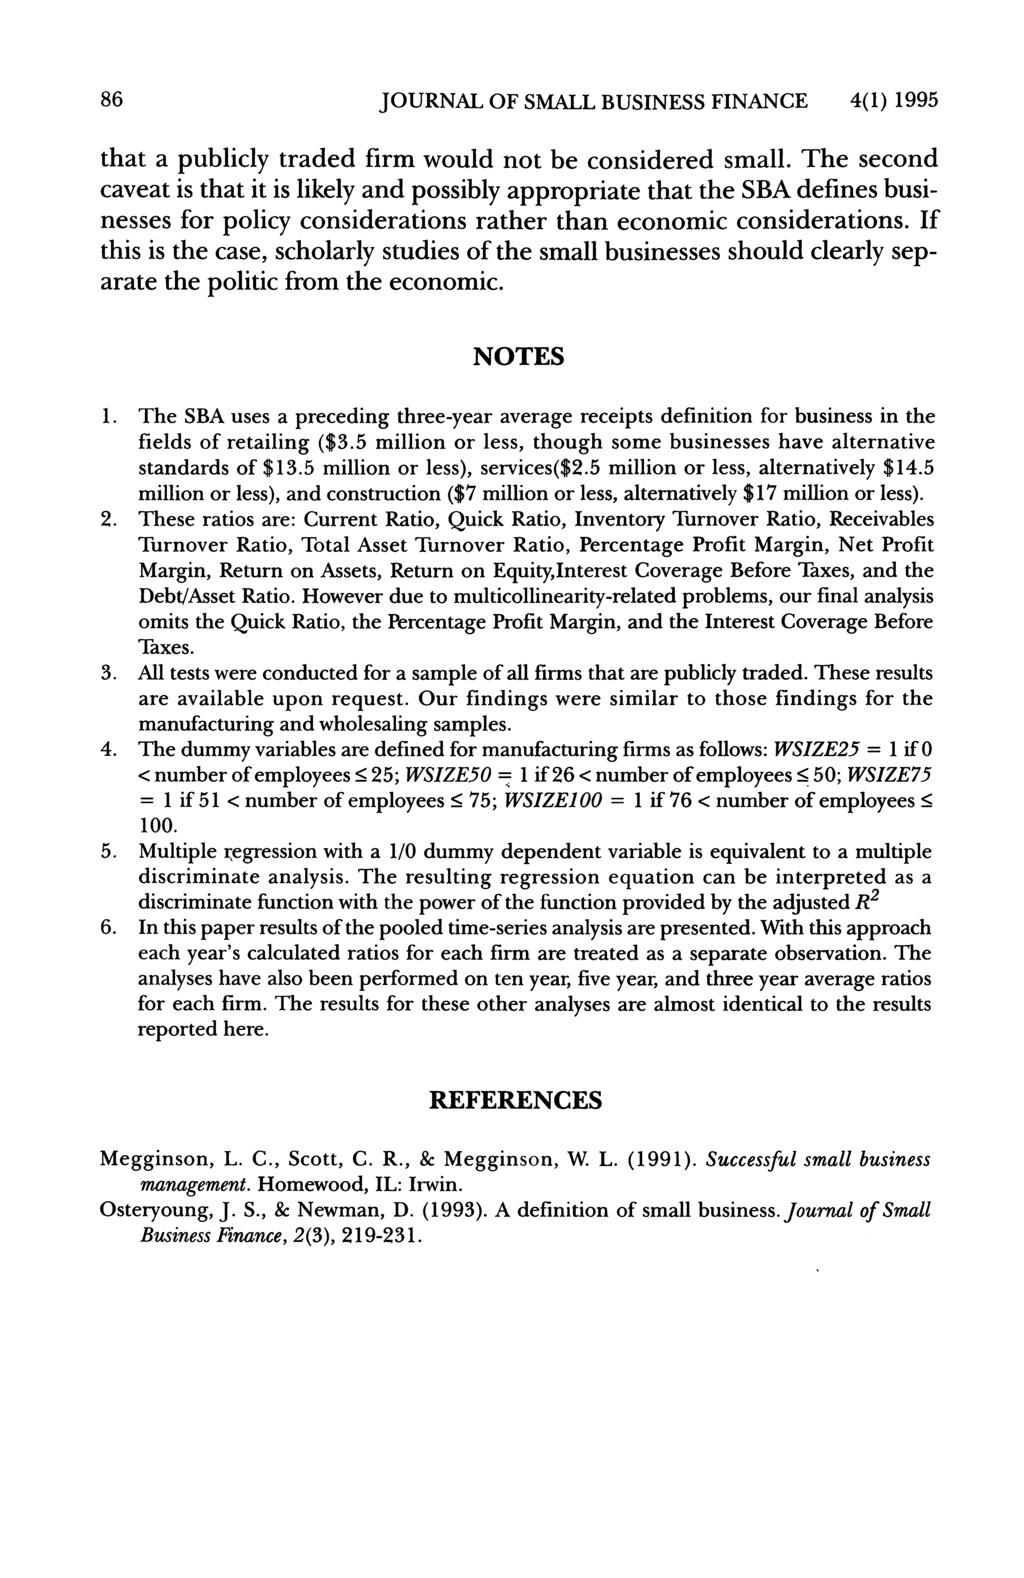 86 JOURNAL OF SMALL BUSINESS FINANCE 4(1) 1995 that a publicly traded firm would not be considered small.